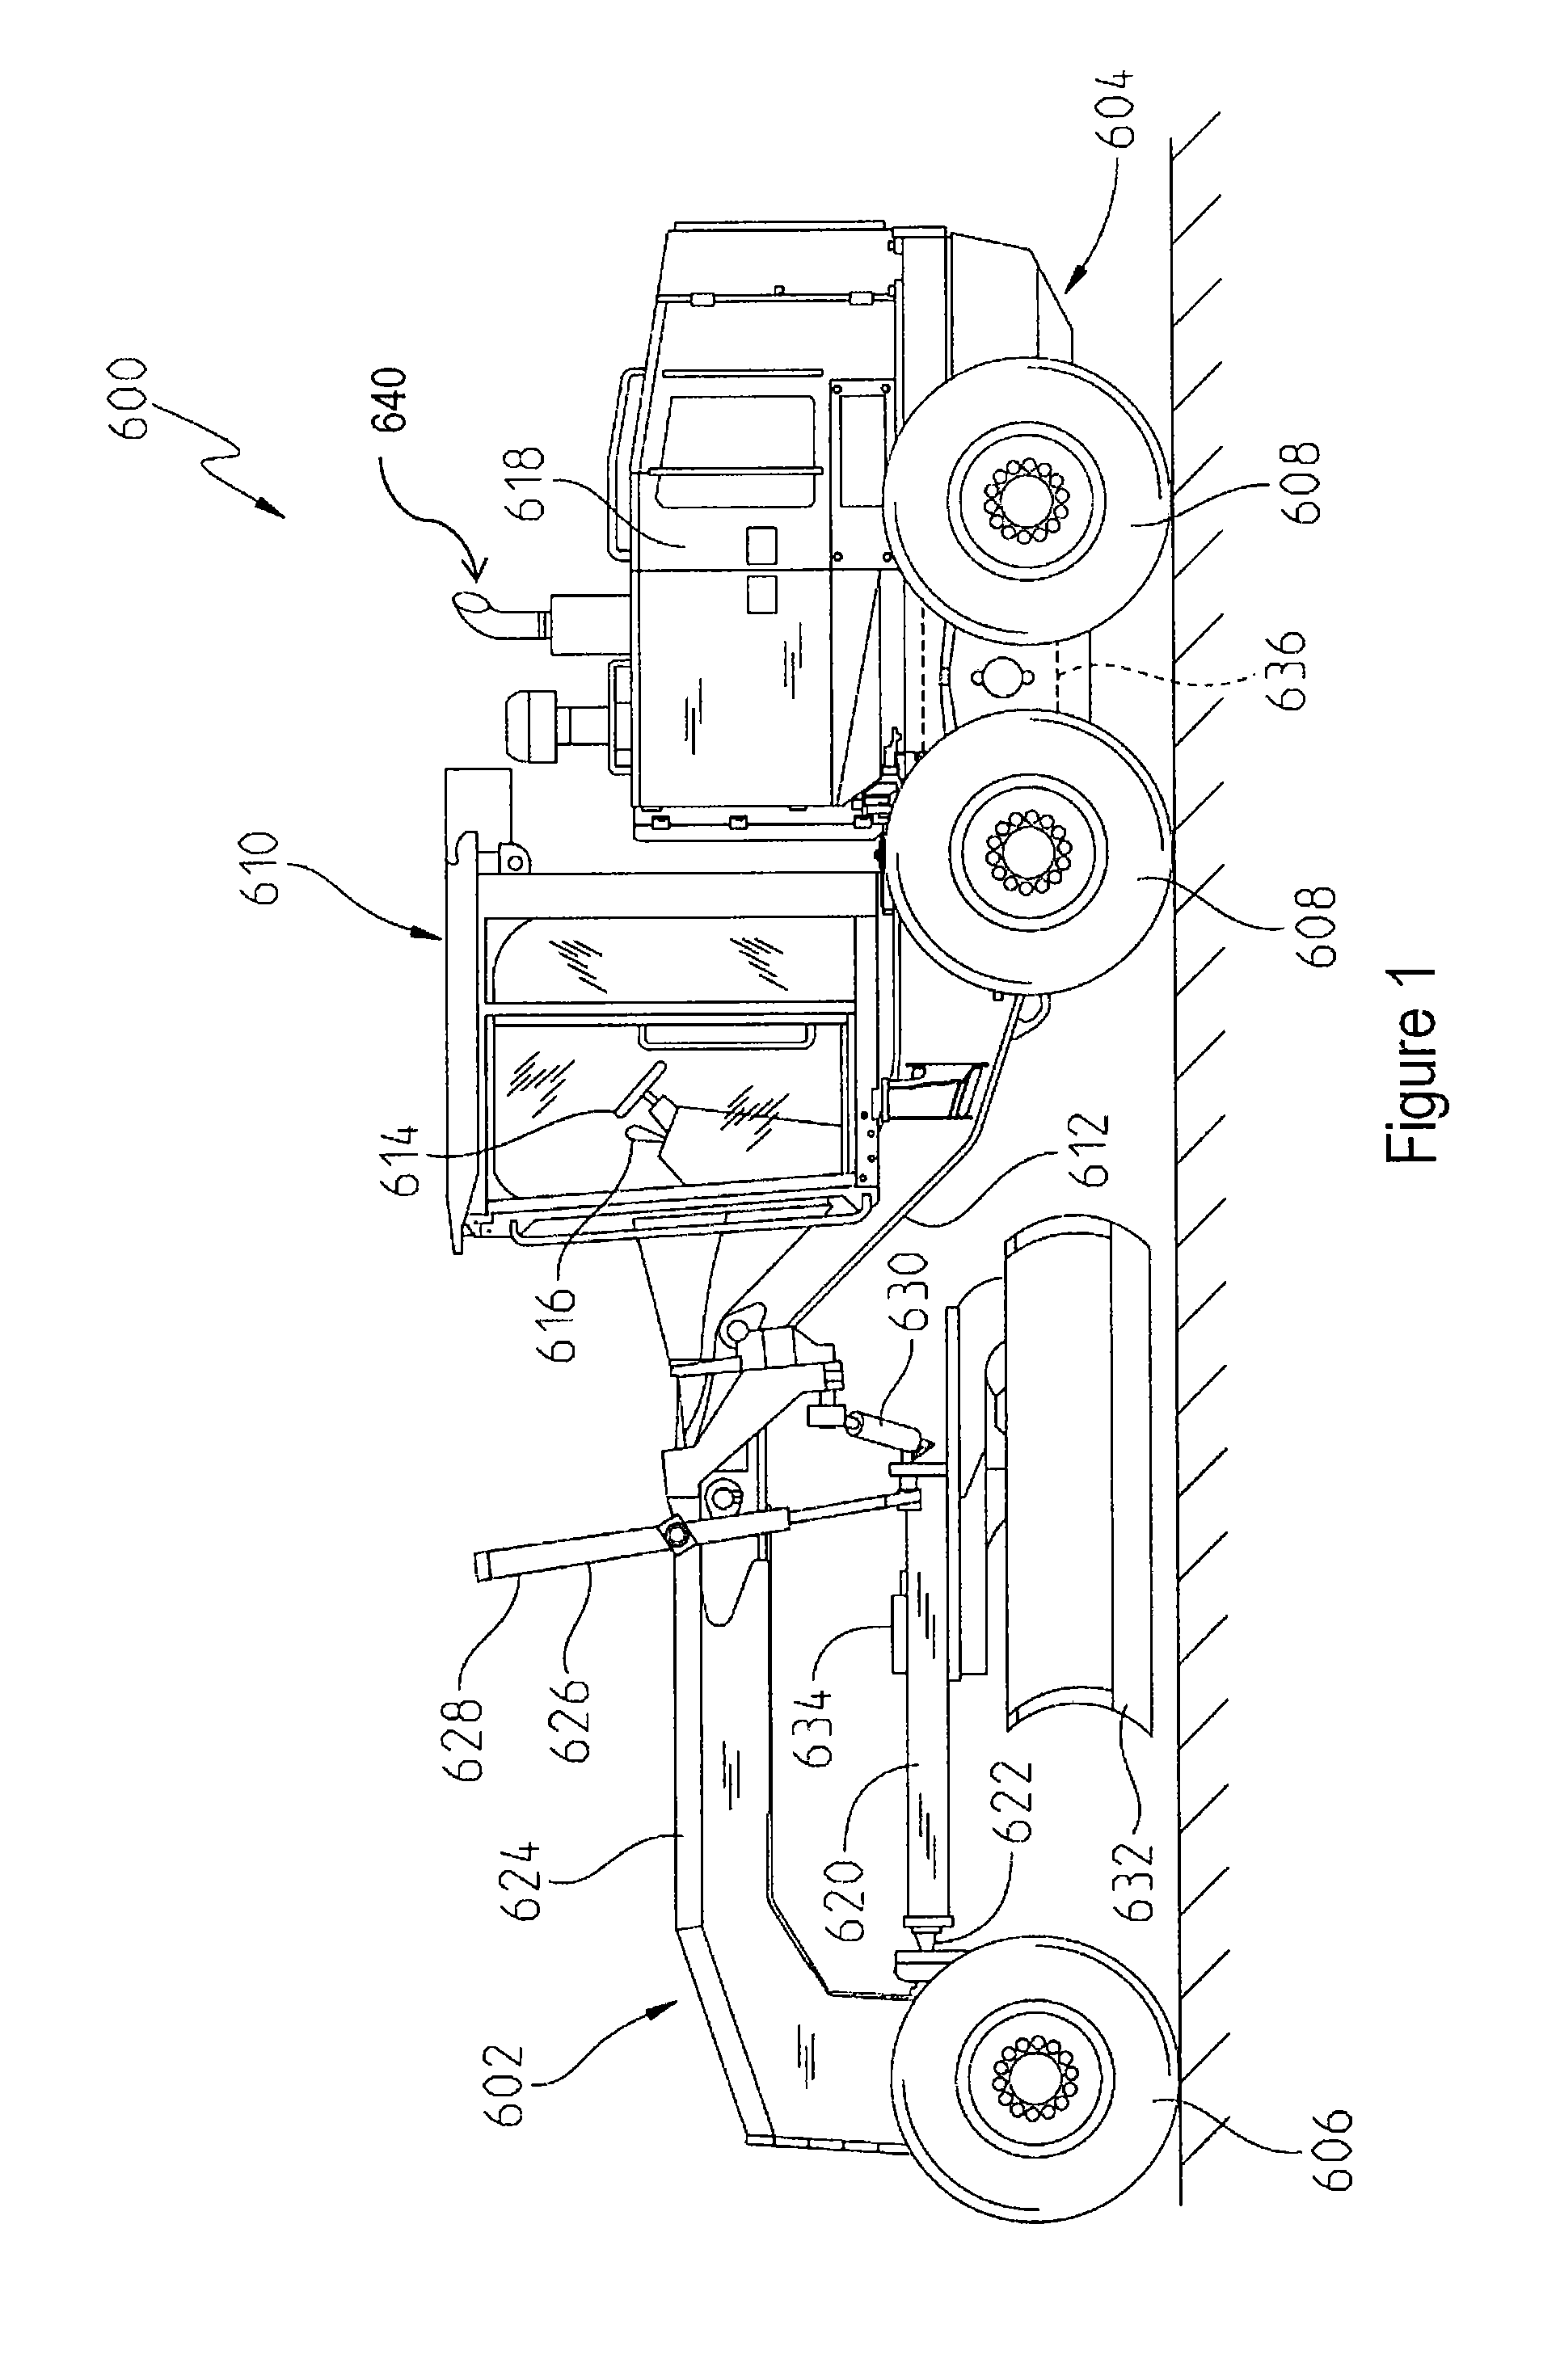 Controlled engine shutdown method and engine shutdown prediction for exhaust system durability